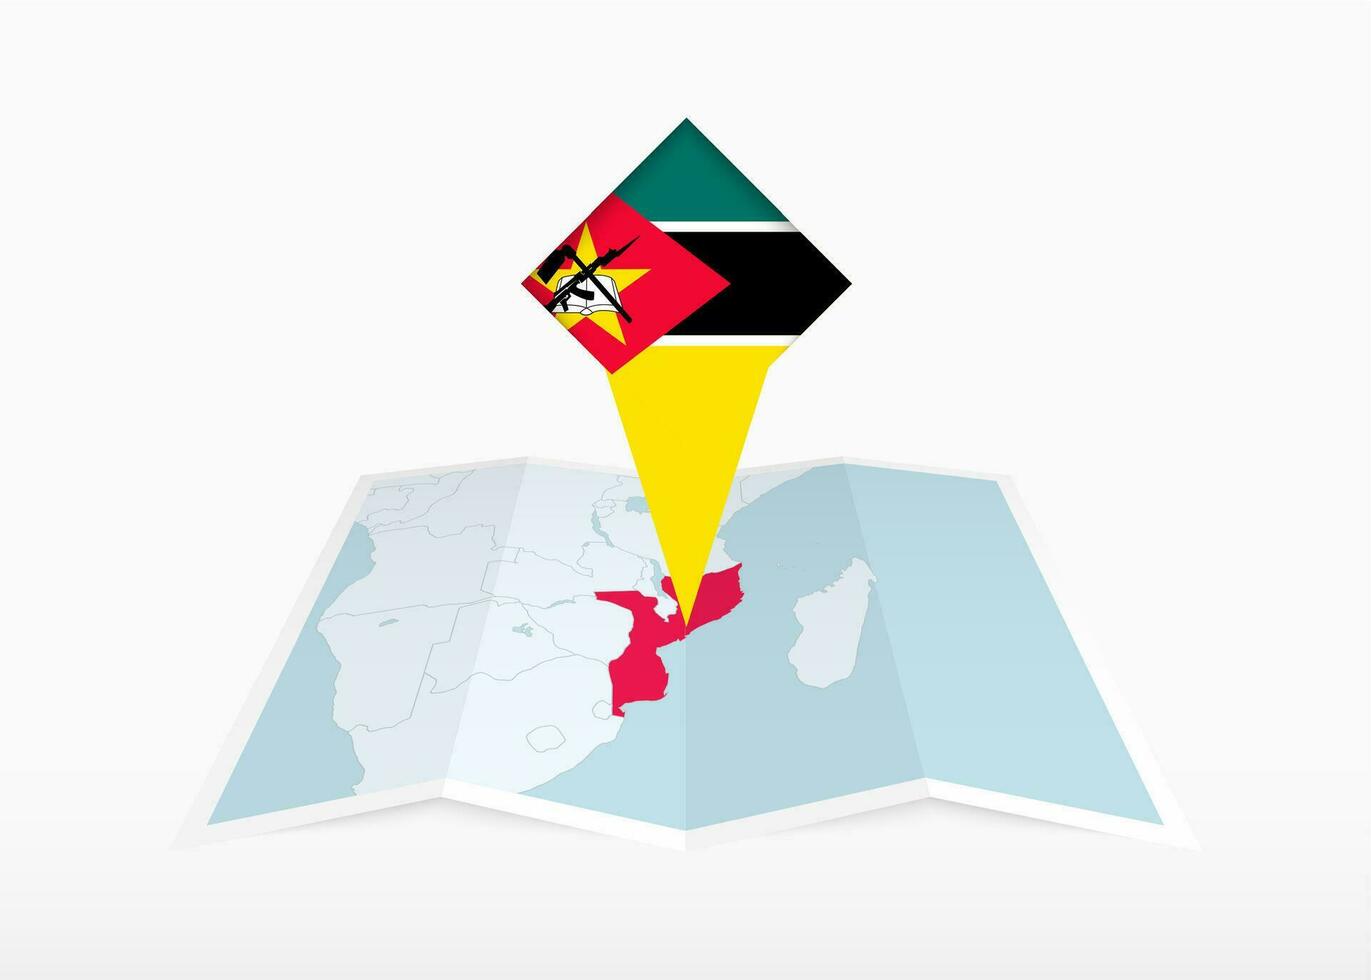 Mozambique is depicted on a folded paper map and pinned location marker with flag of Mozambique. vector